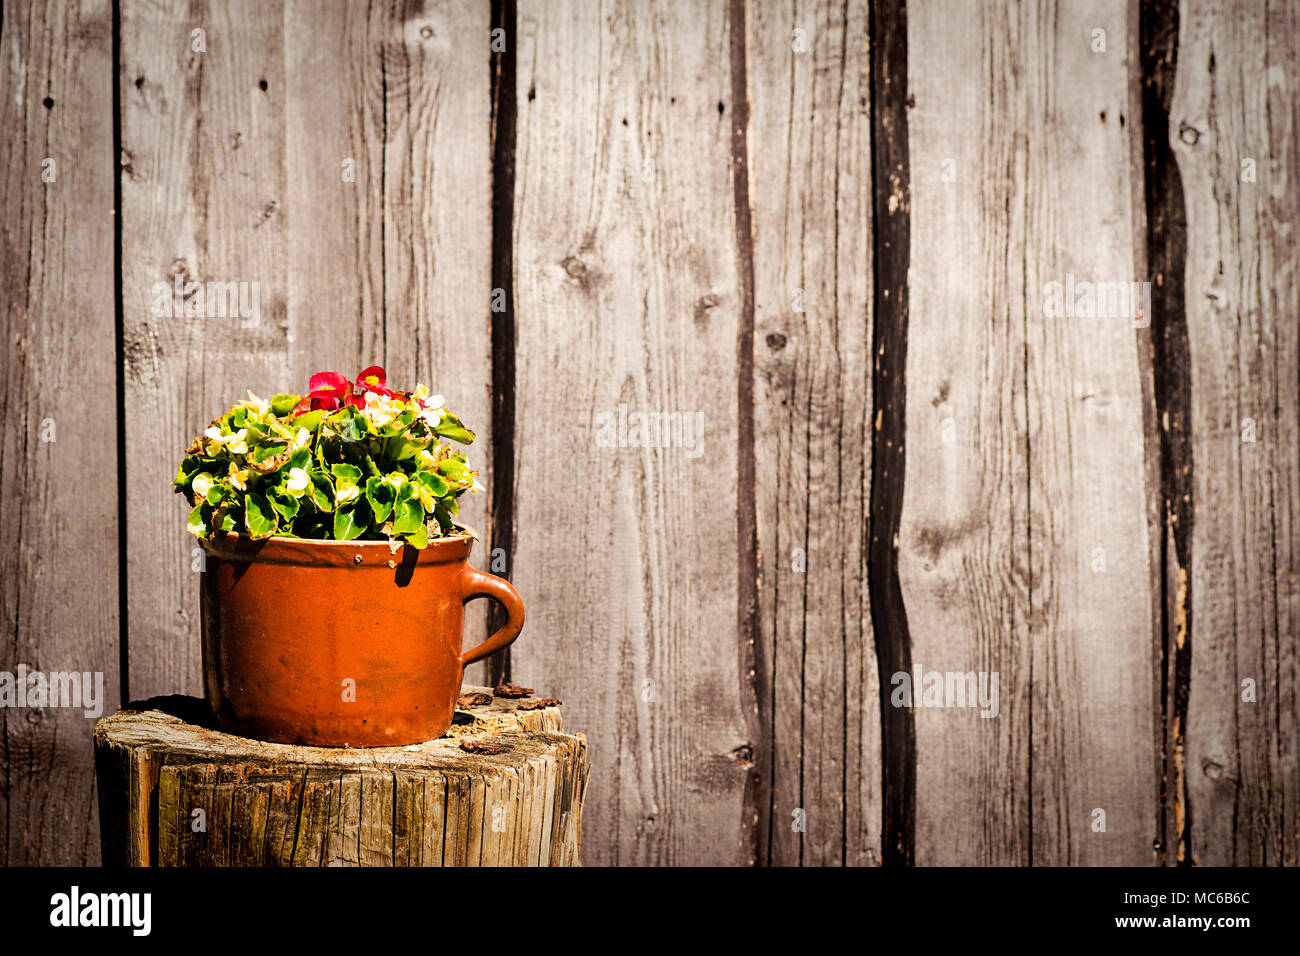 Flowers in clay pot on wooden background. Stock Photo